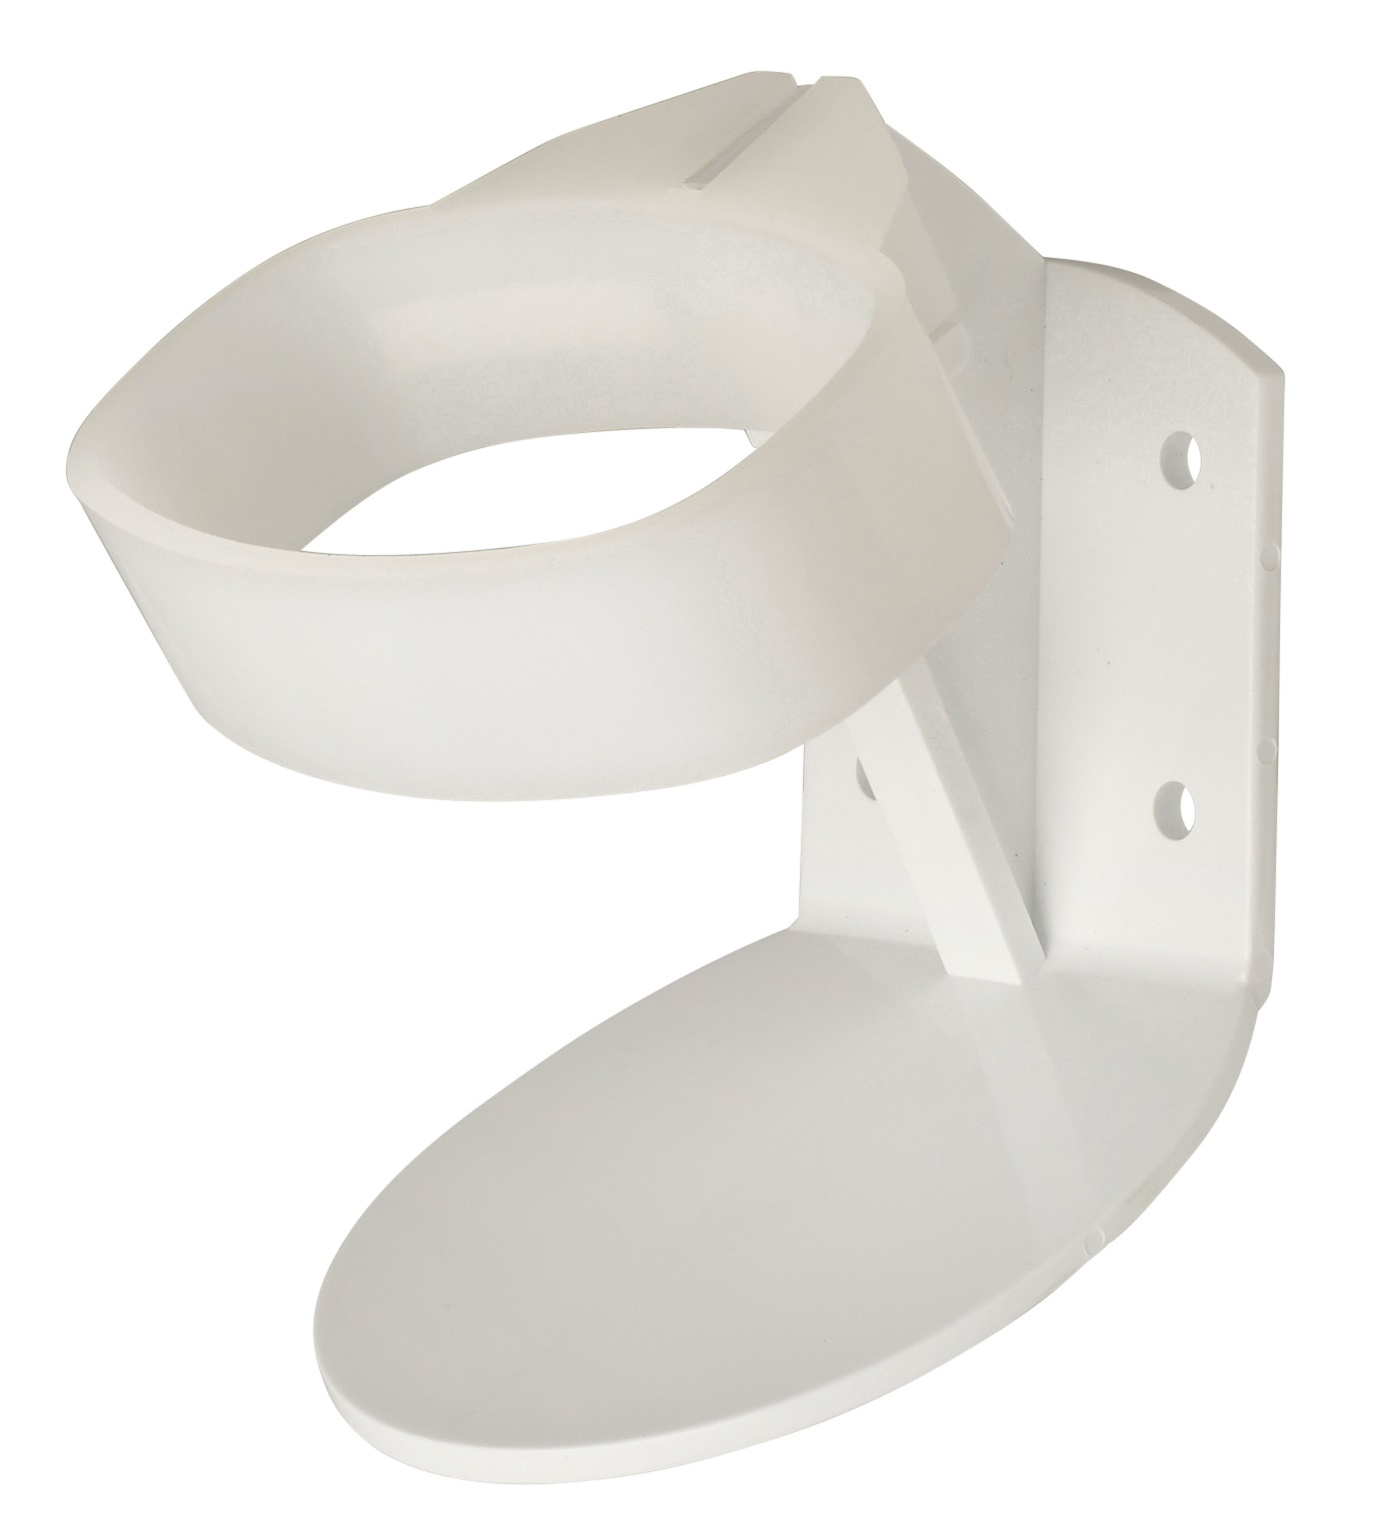 Microshield L-Shaped Angled Wall Bracket to fit 70000387 or 70000388 image 0